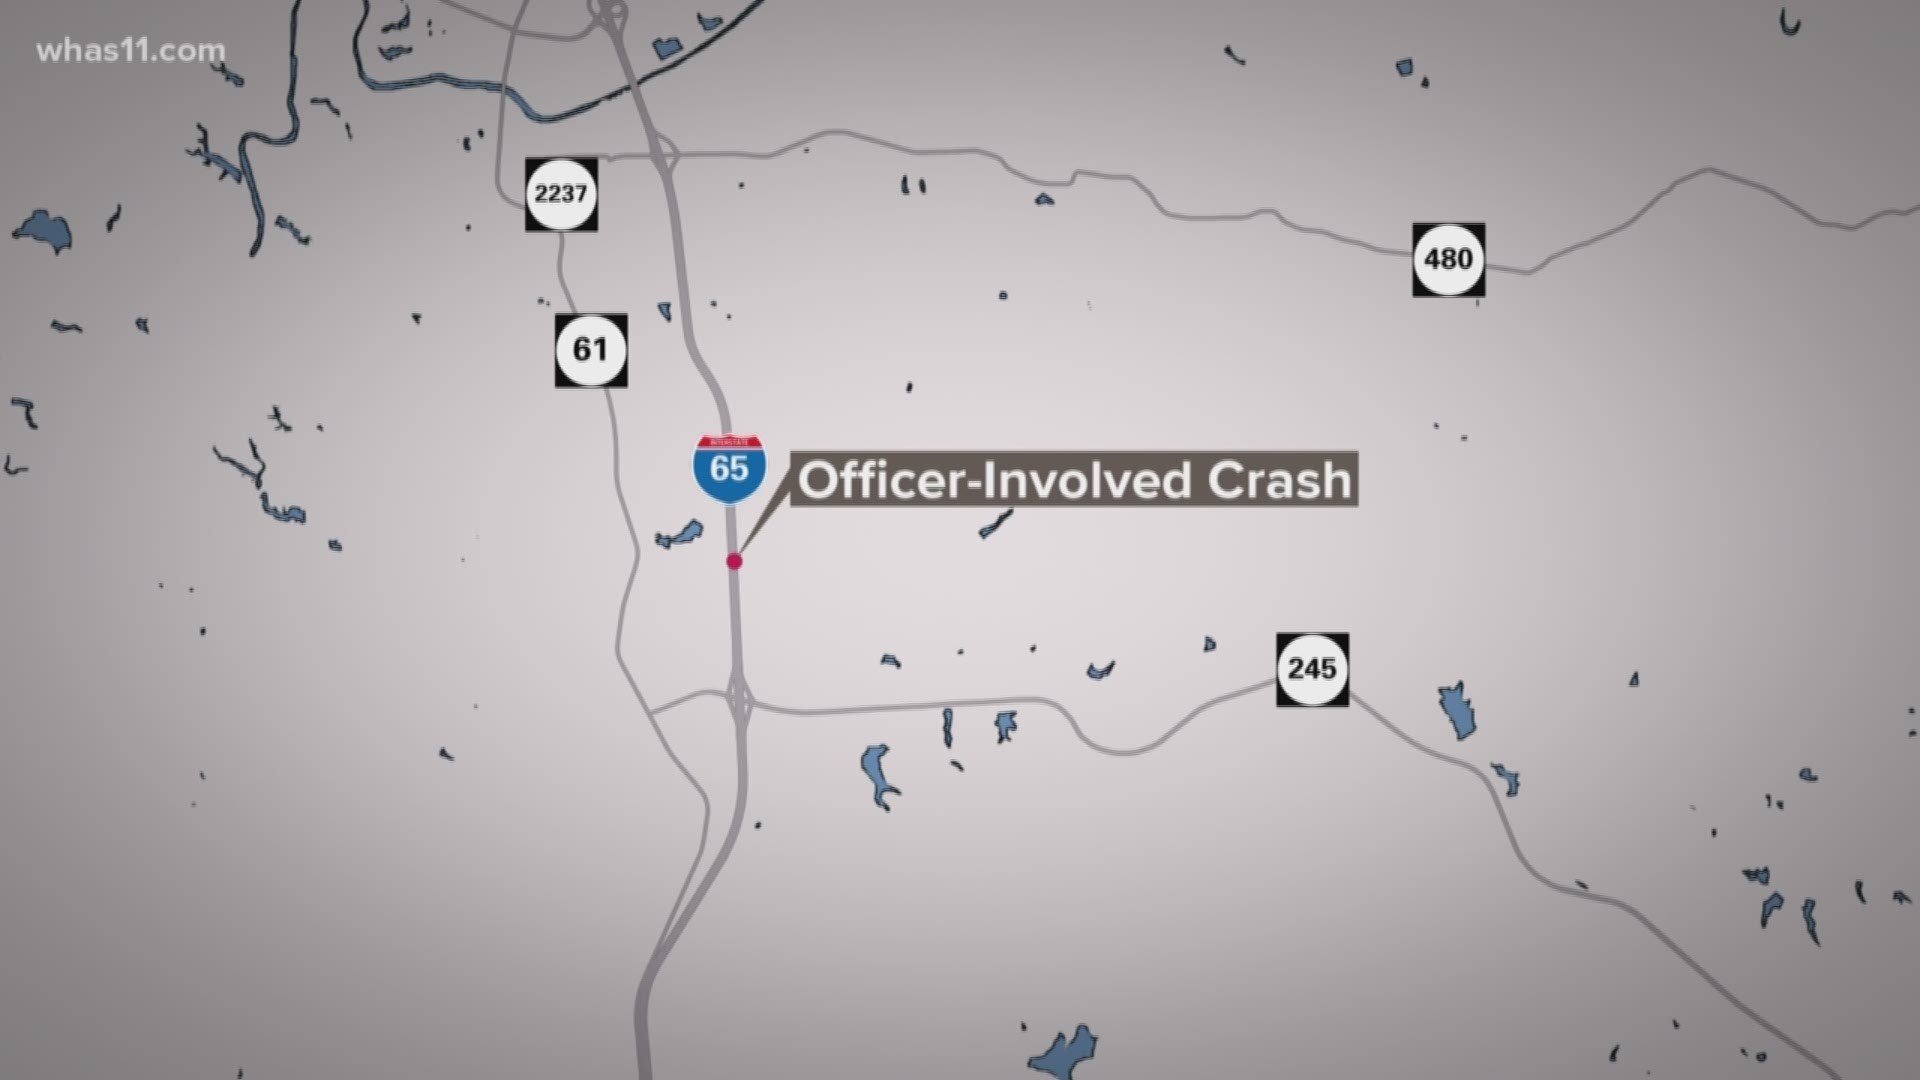 A police officer is recovering tonight after being injured in an accident in Bullitt County.